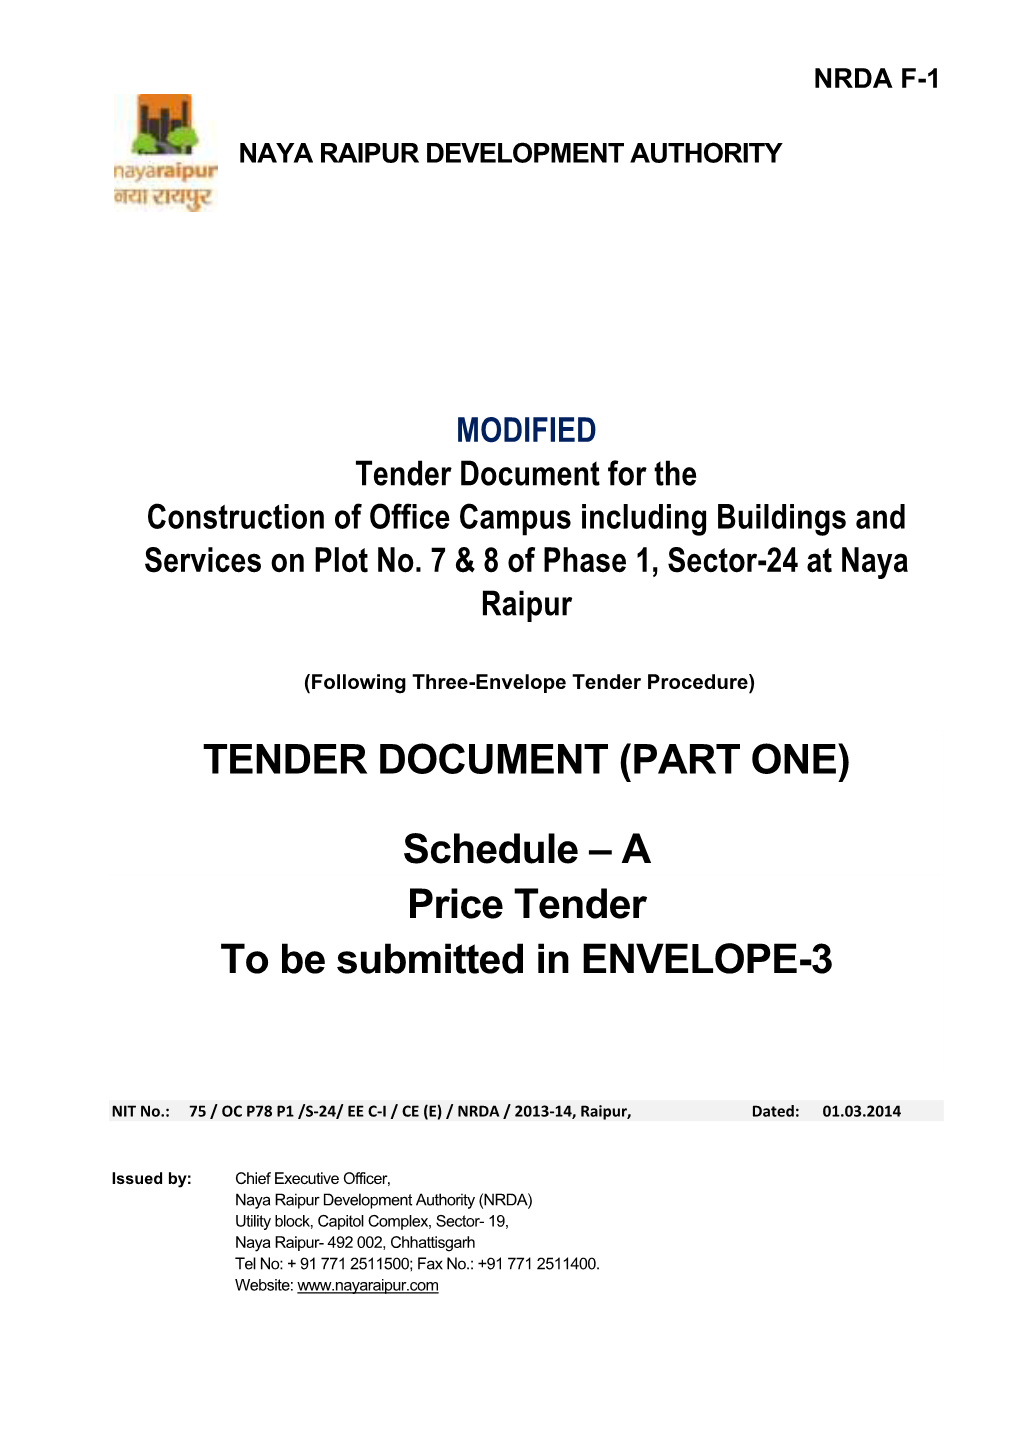 Schedule – a Price Tender to Be Submitted in ENVELOPE-3